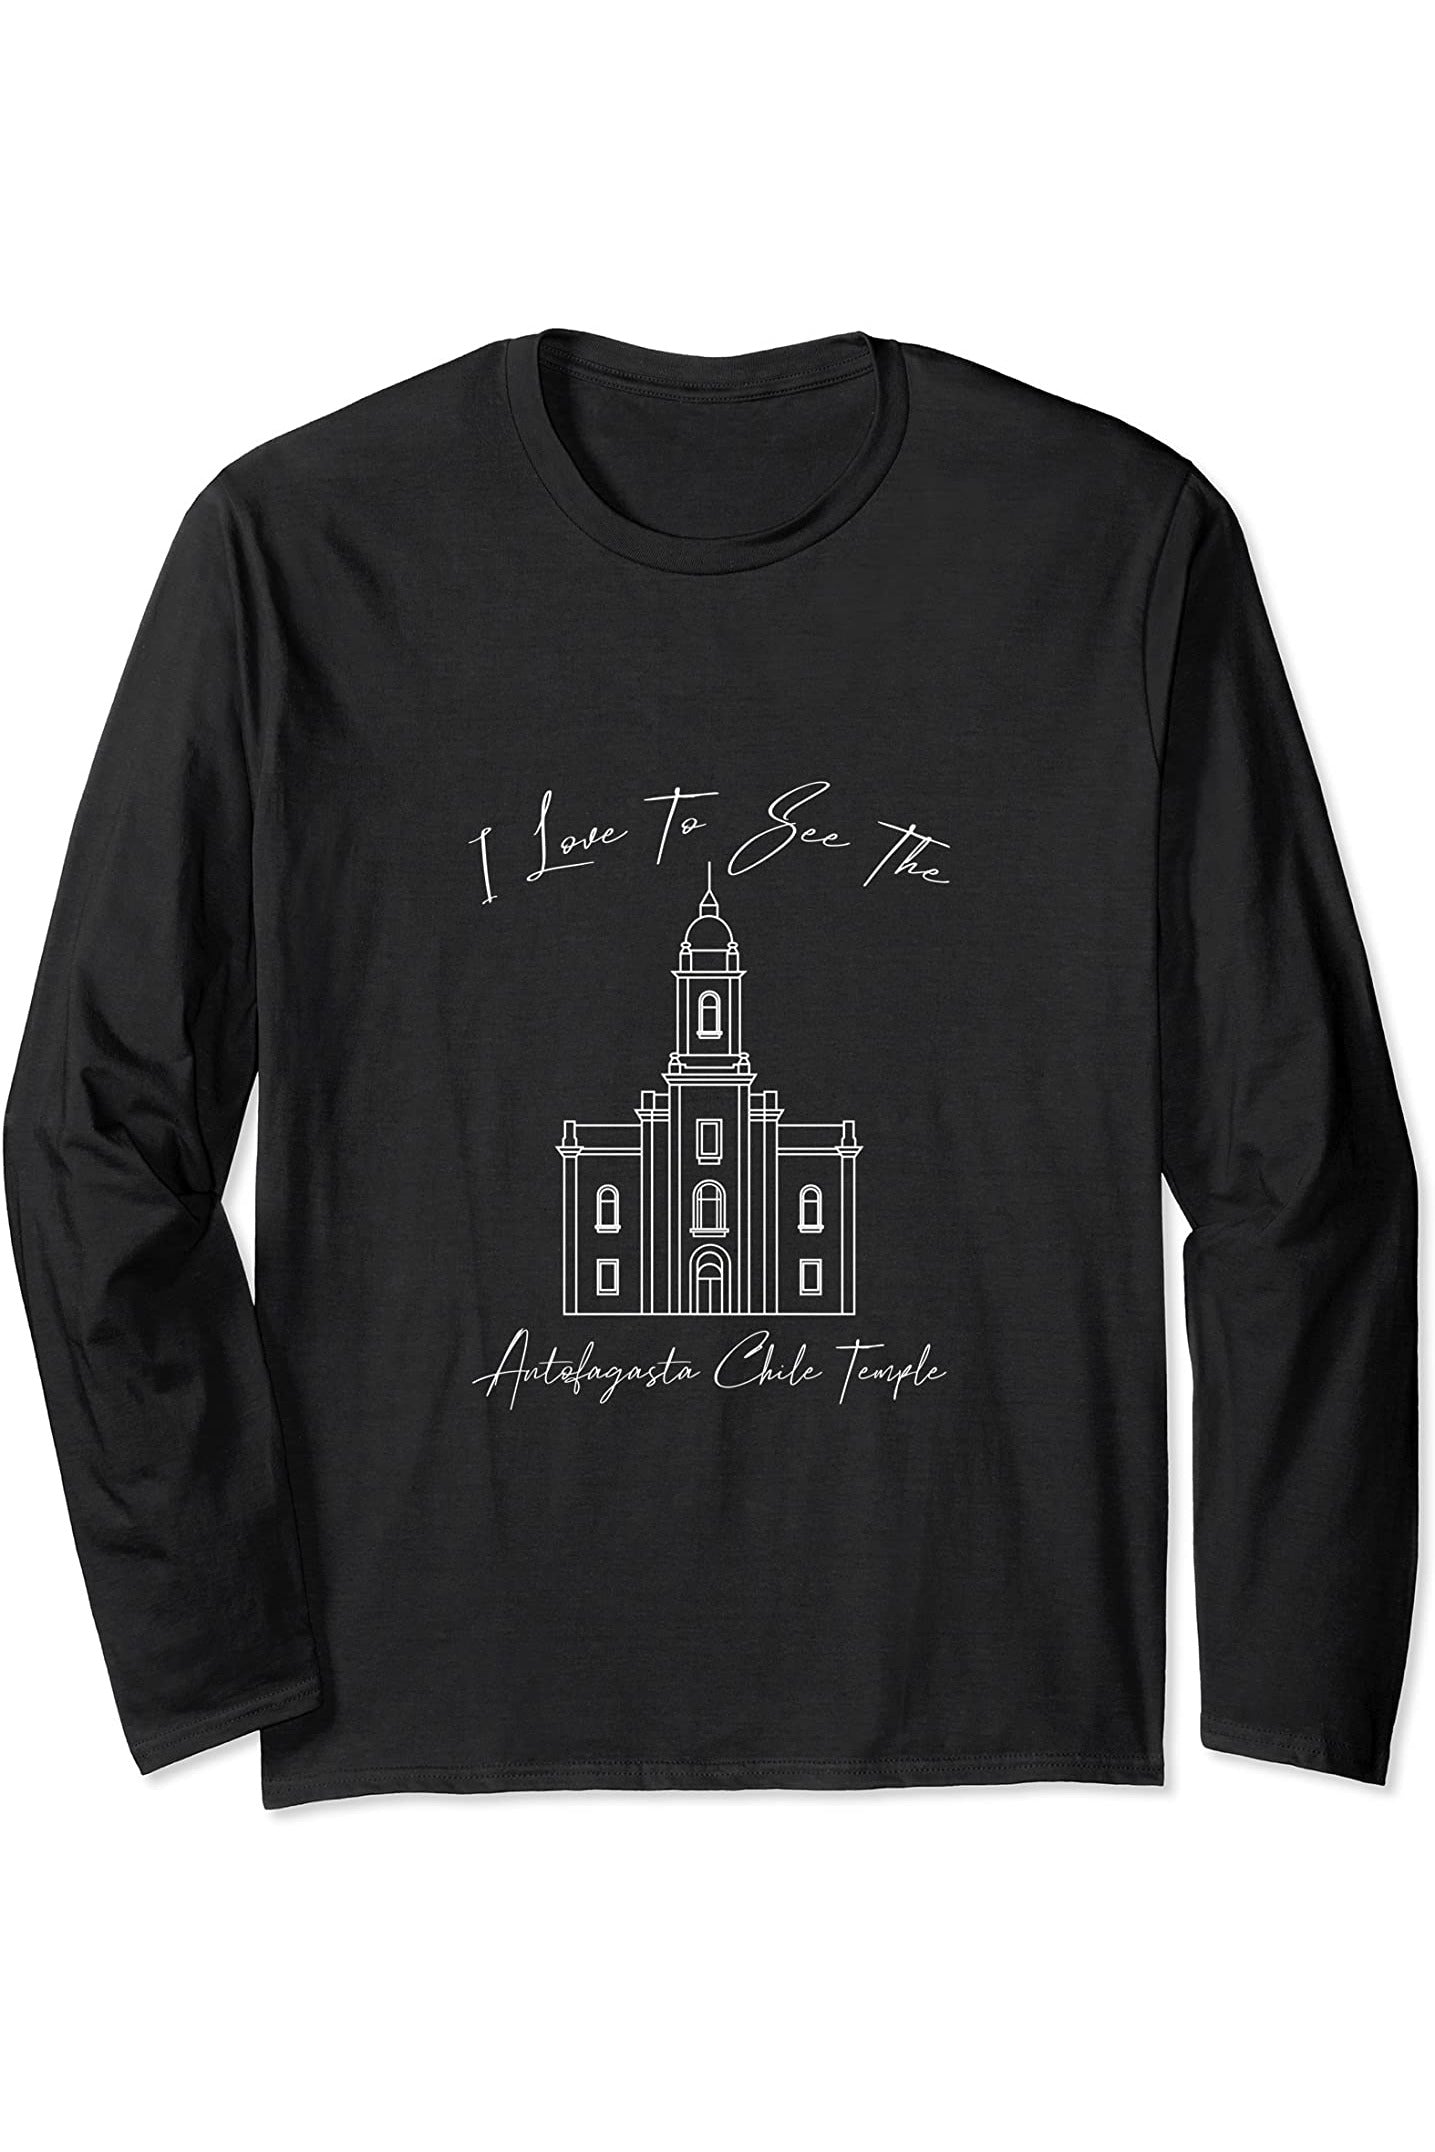 Antofagasta Chile Temple Long Sleeve T-Shirt - Calligraphy Style (English) US